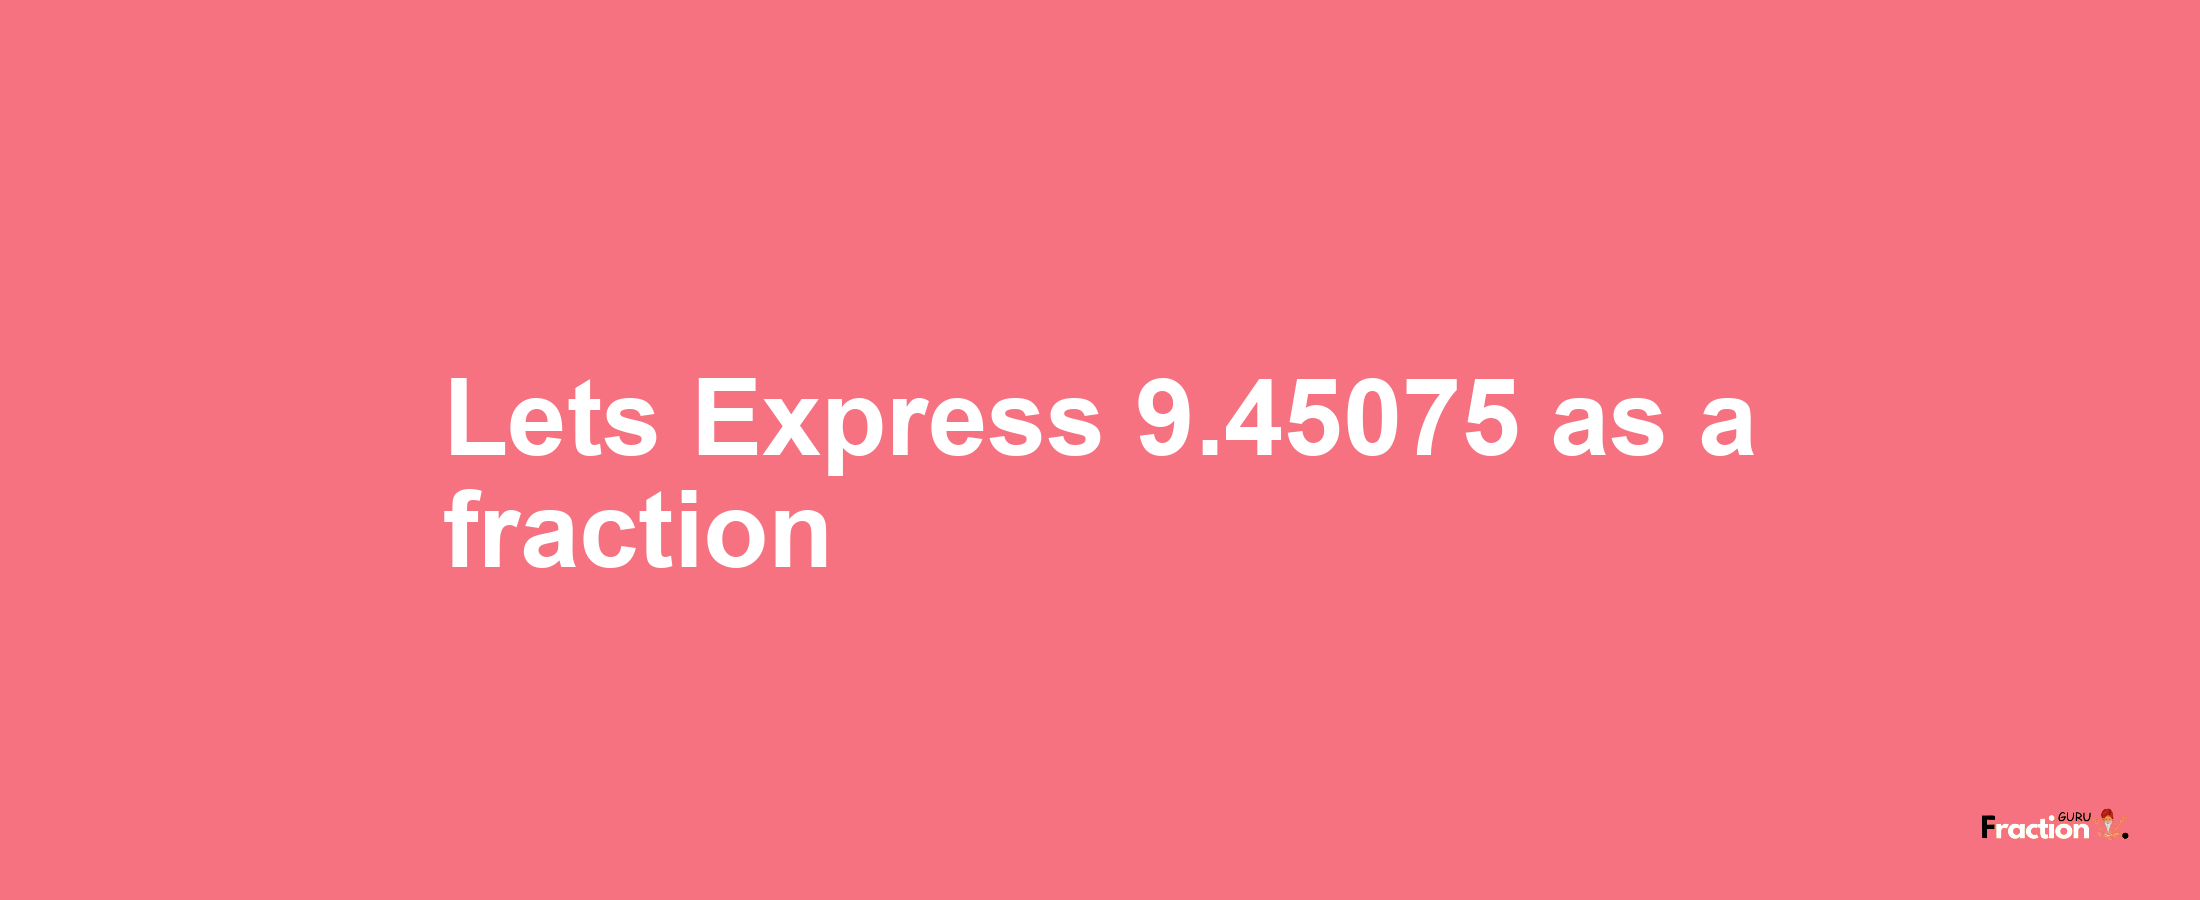 Lets Express 9.45075 as afraction